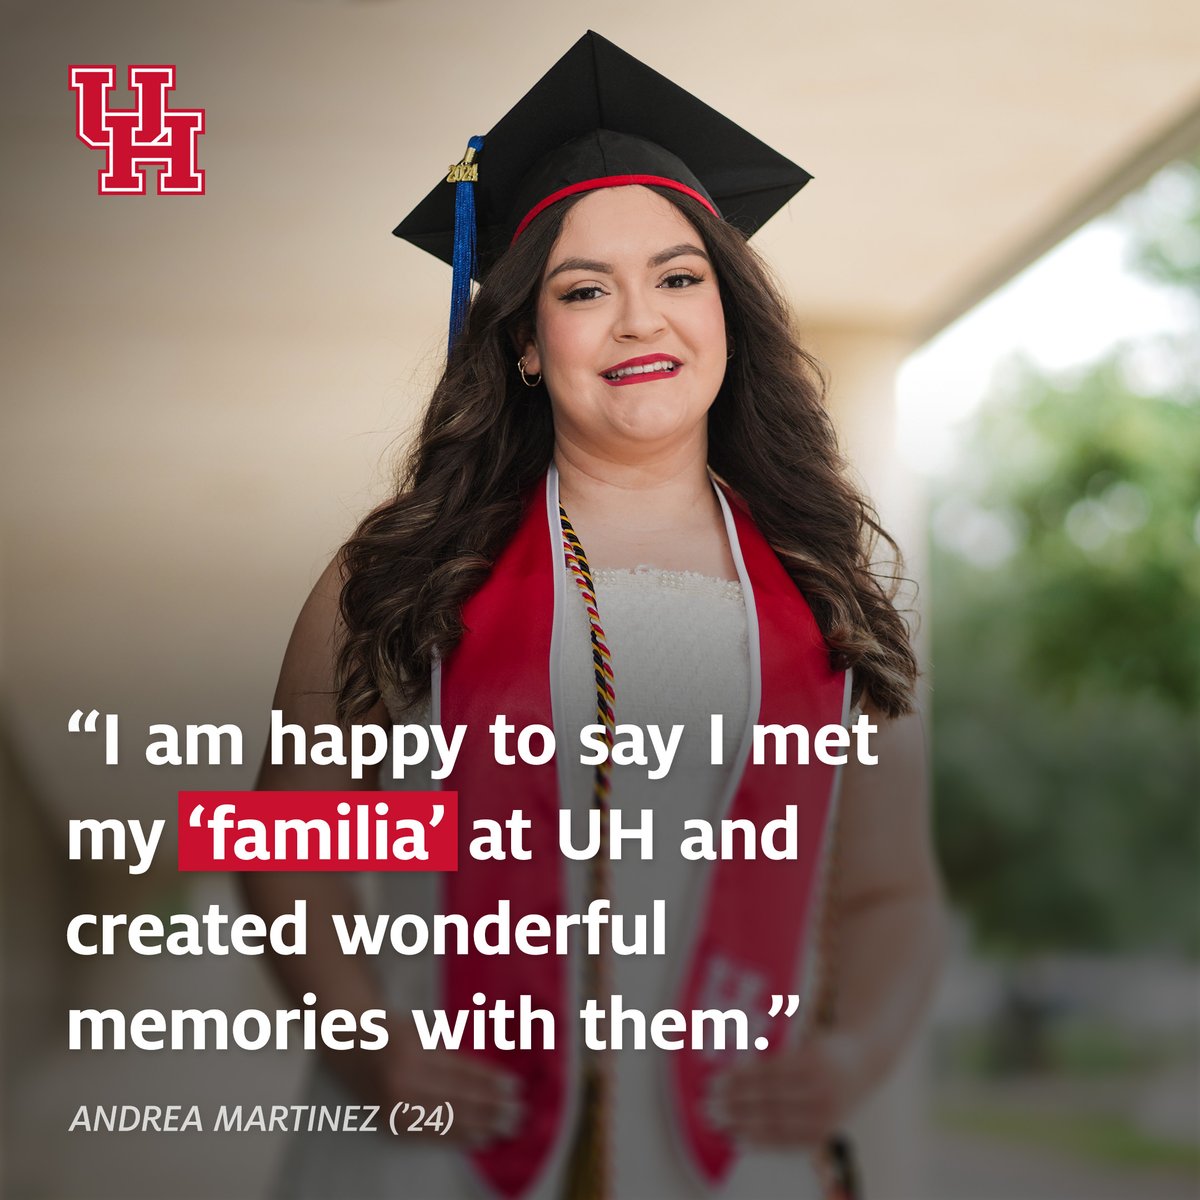 As a double major, Andrea Martinez has taken on twice the workload since arriving at UH. “Every student has a different story to tell,” she said. As a student leader and ambassador, she’s been able to share hers with peers and prospective Coogs. Congratulations, Andrea! 🎓